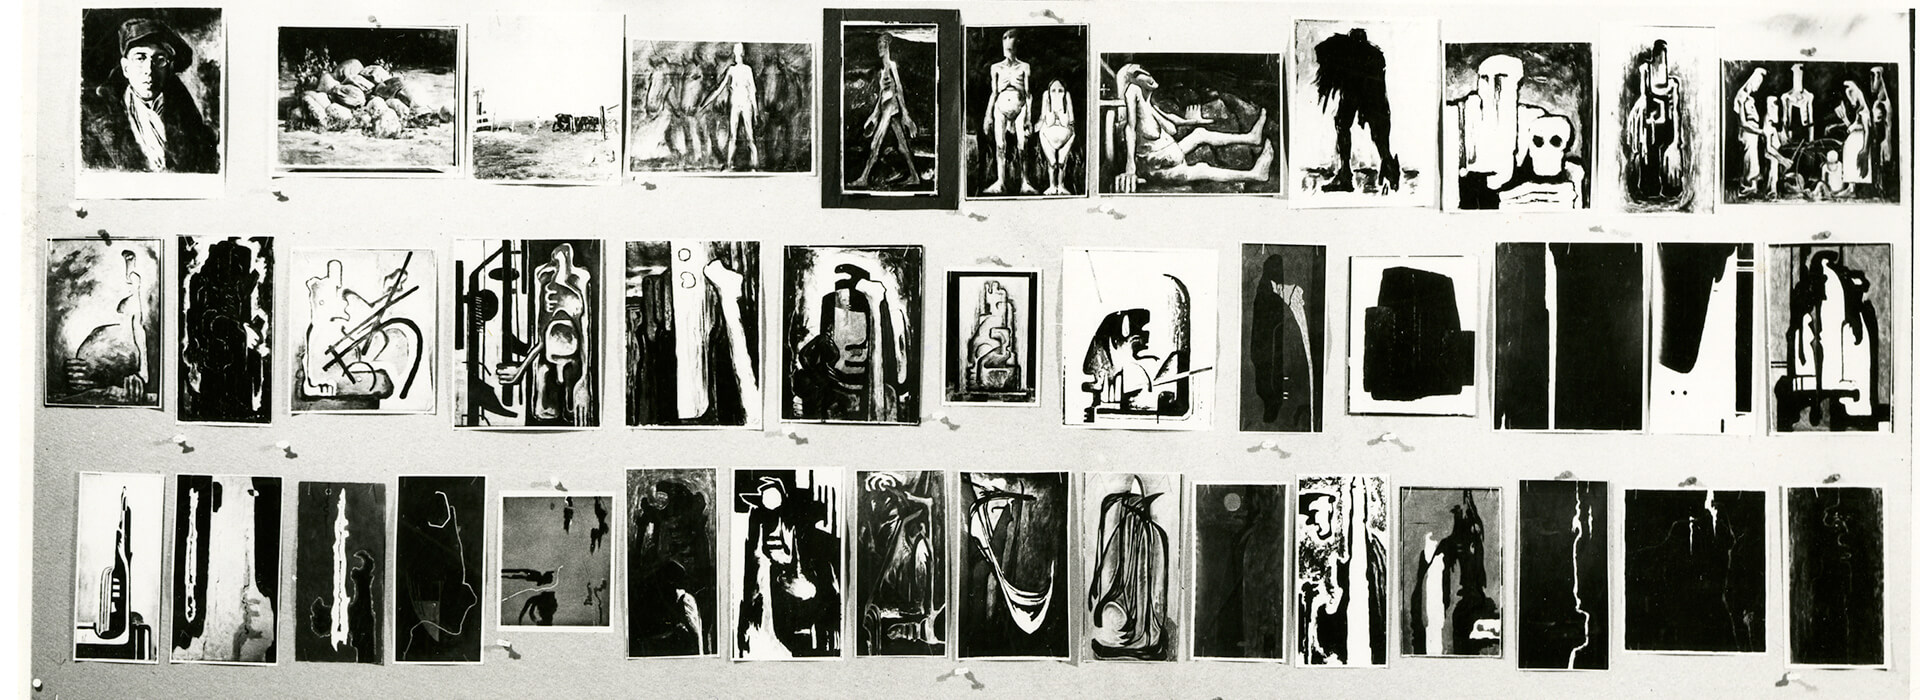 Black and white photo of several artworks by Clyfford Still